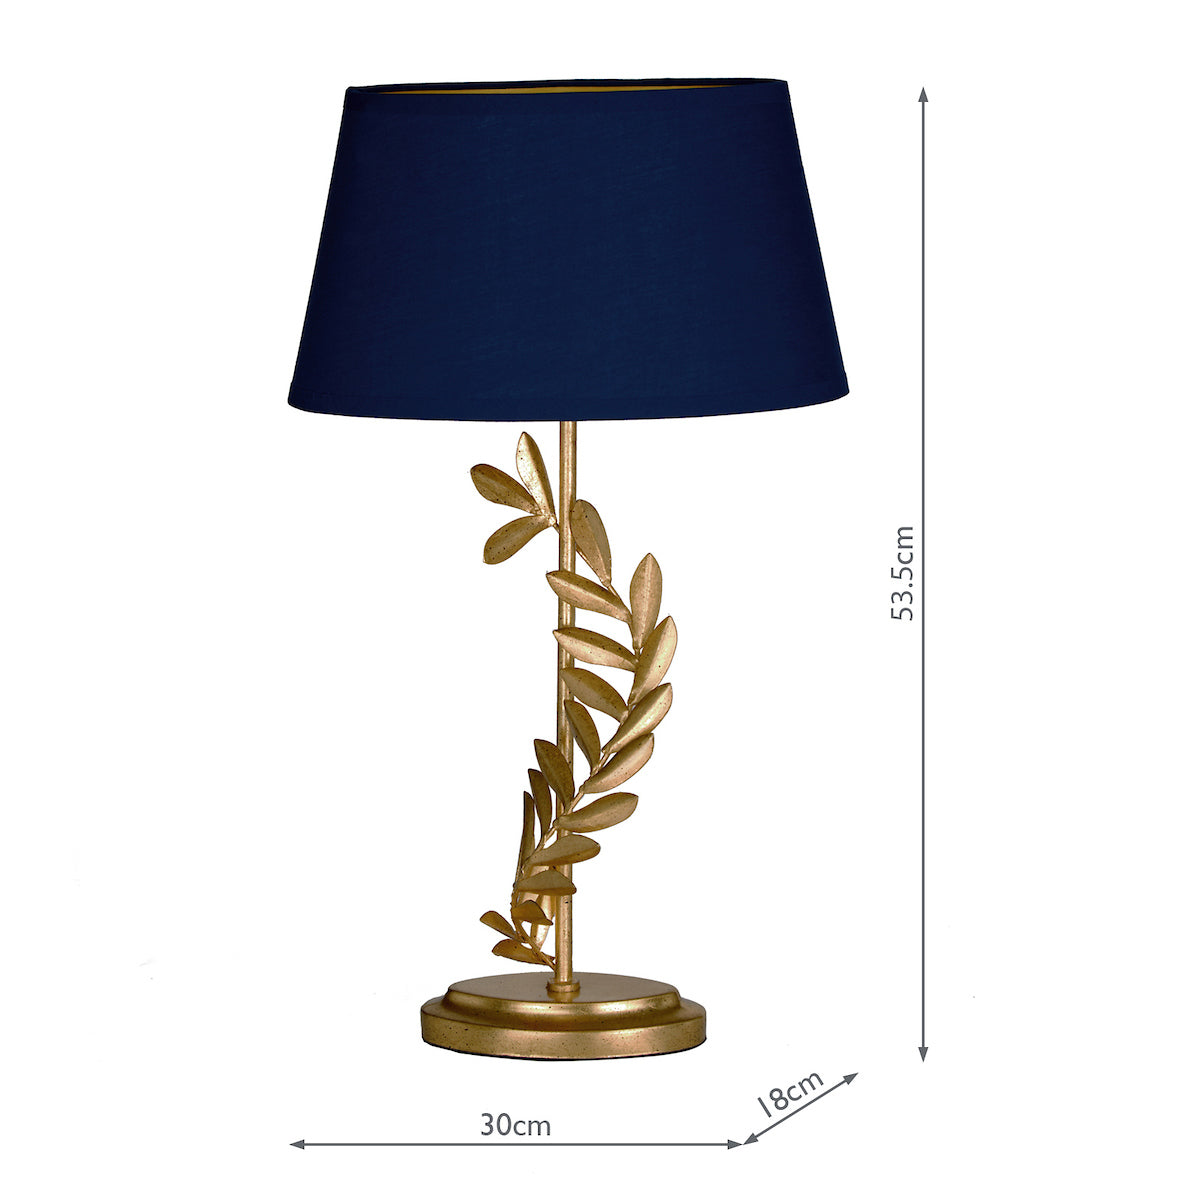 Laura Ashley Archer Table Lamp  LA3734602-Q Leaf Design in Gold with Navy Blue Shade